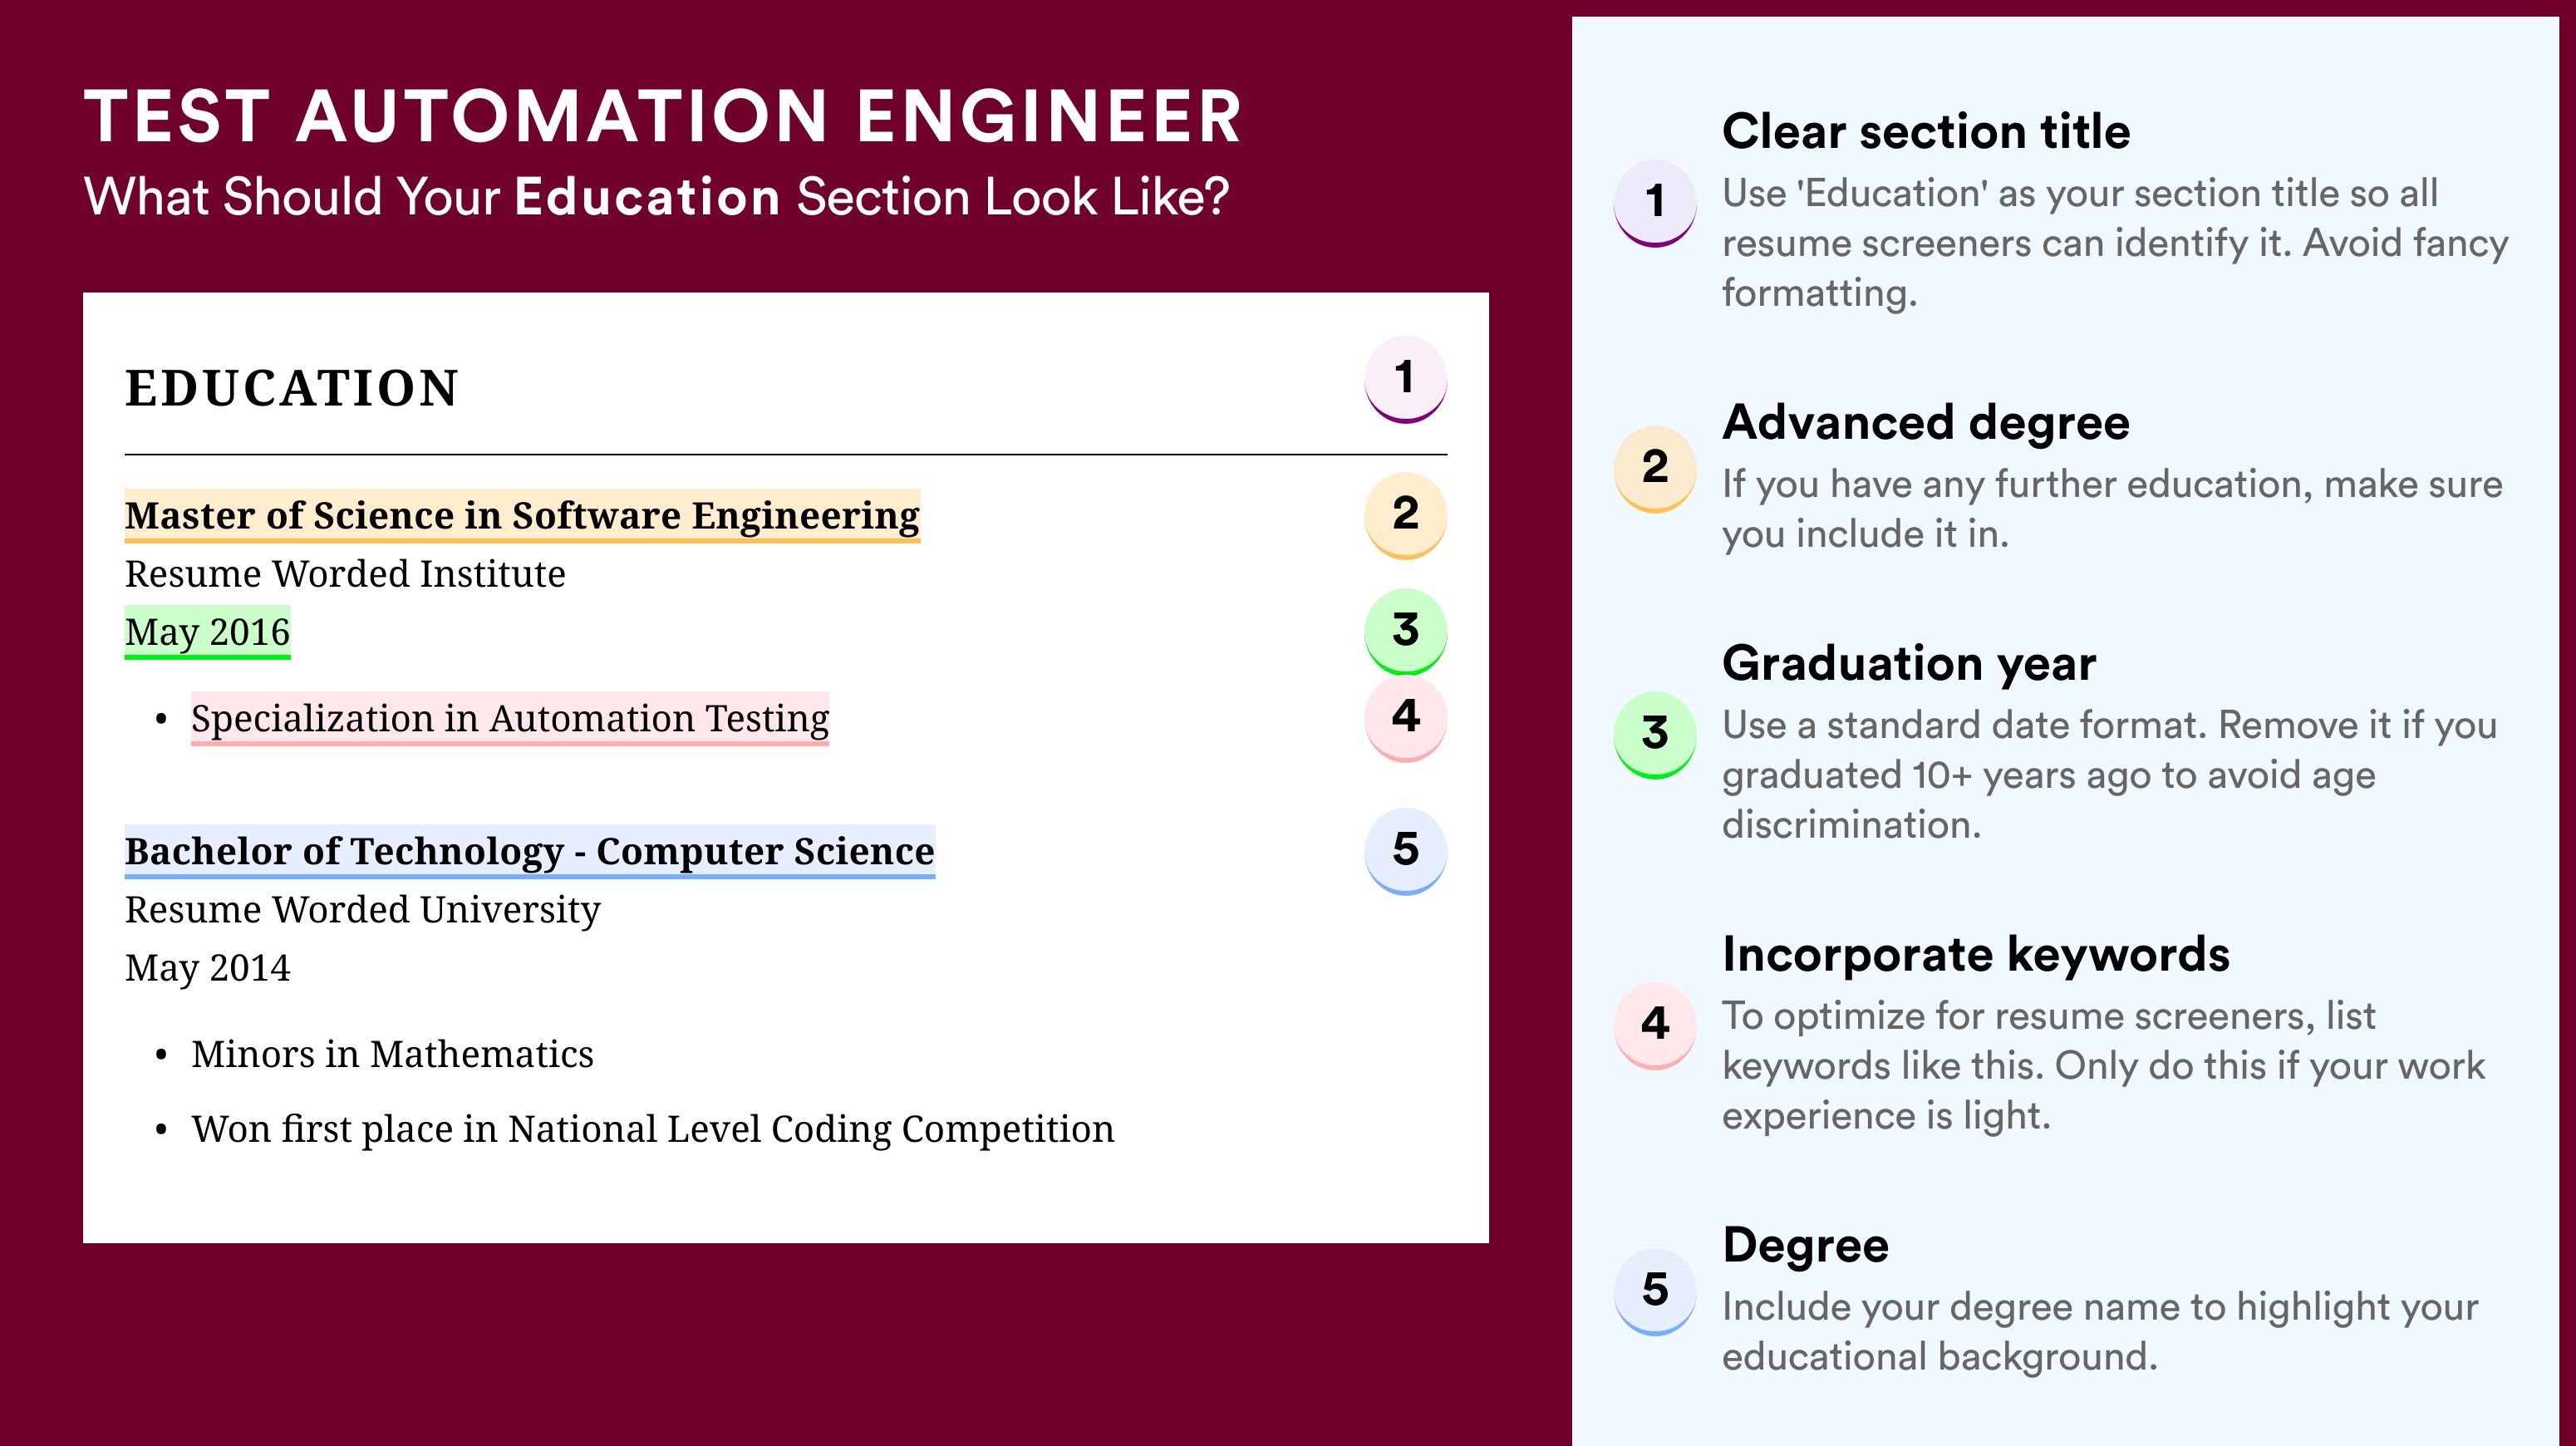 How To Write An Education Section - Test Automation Engineer Roles